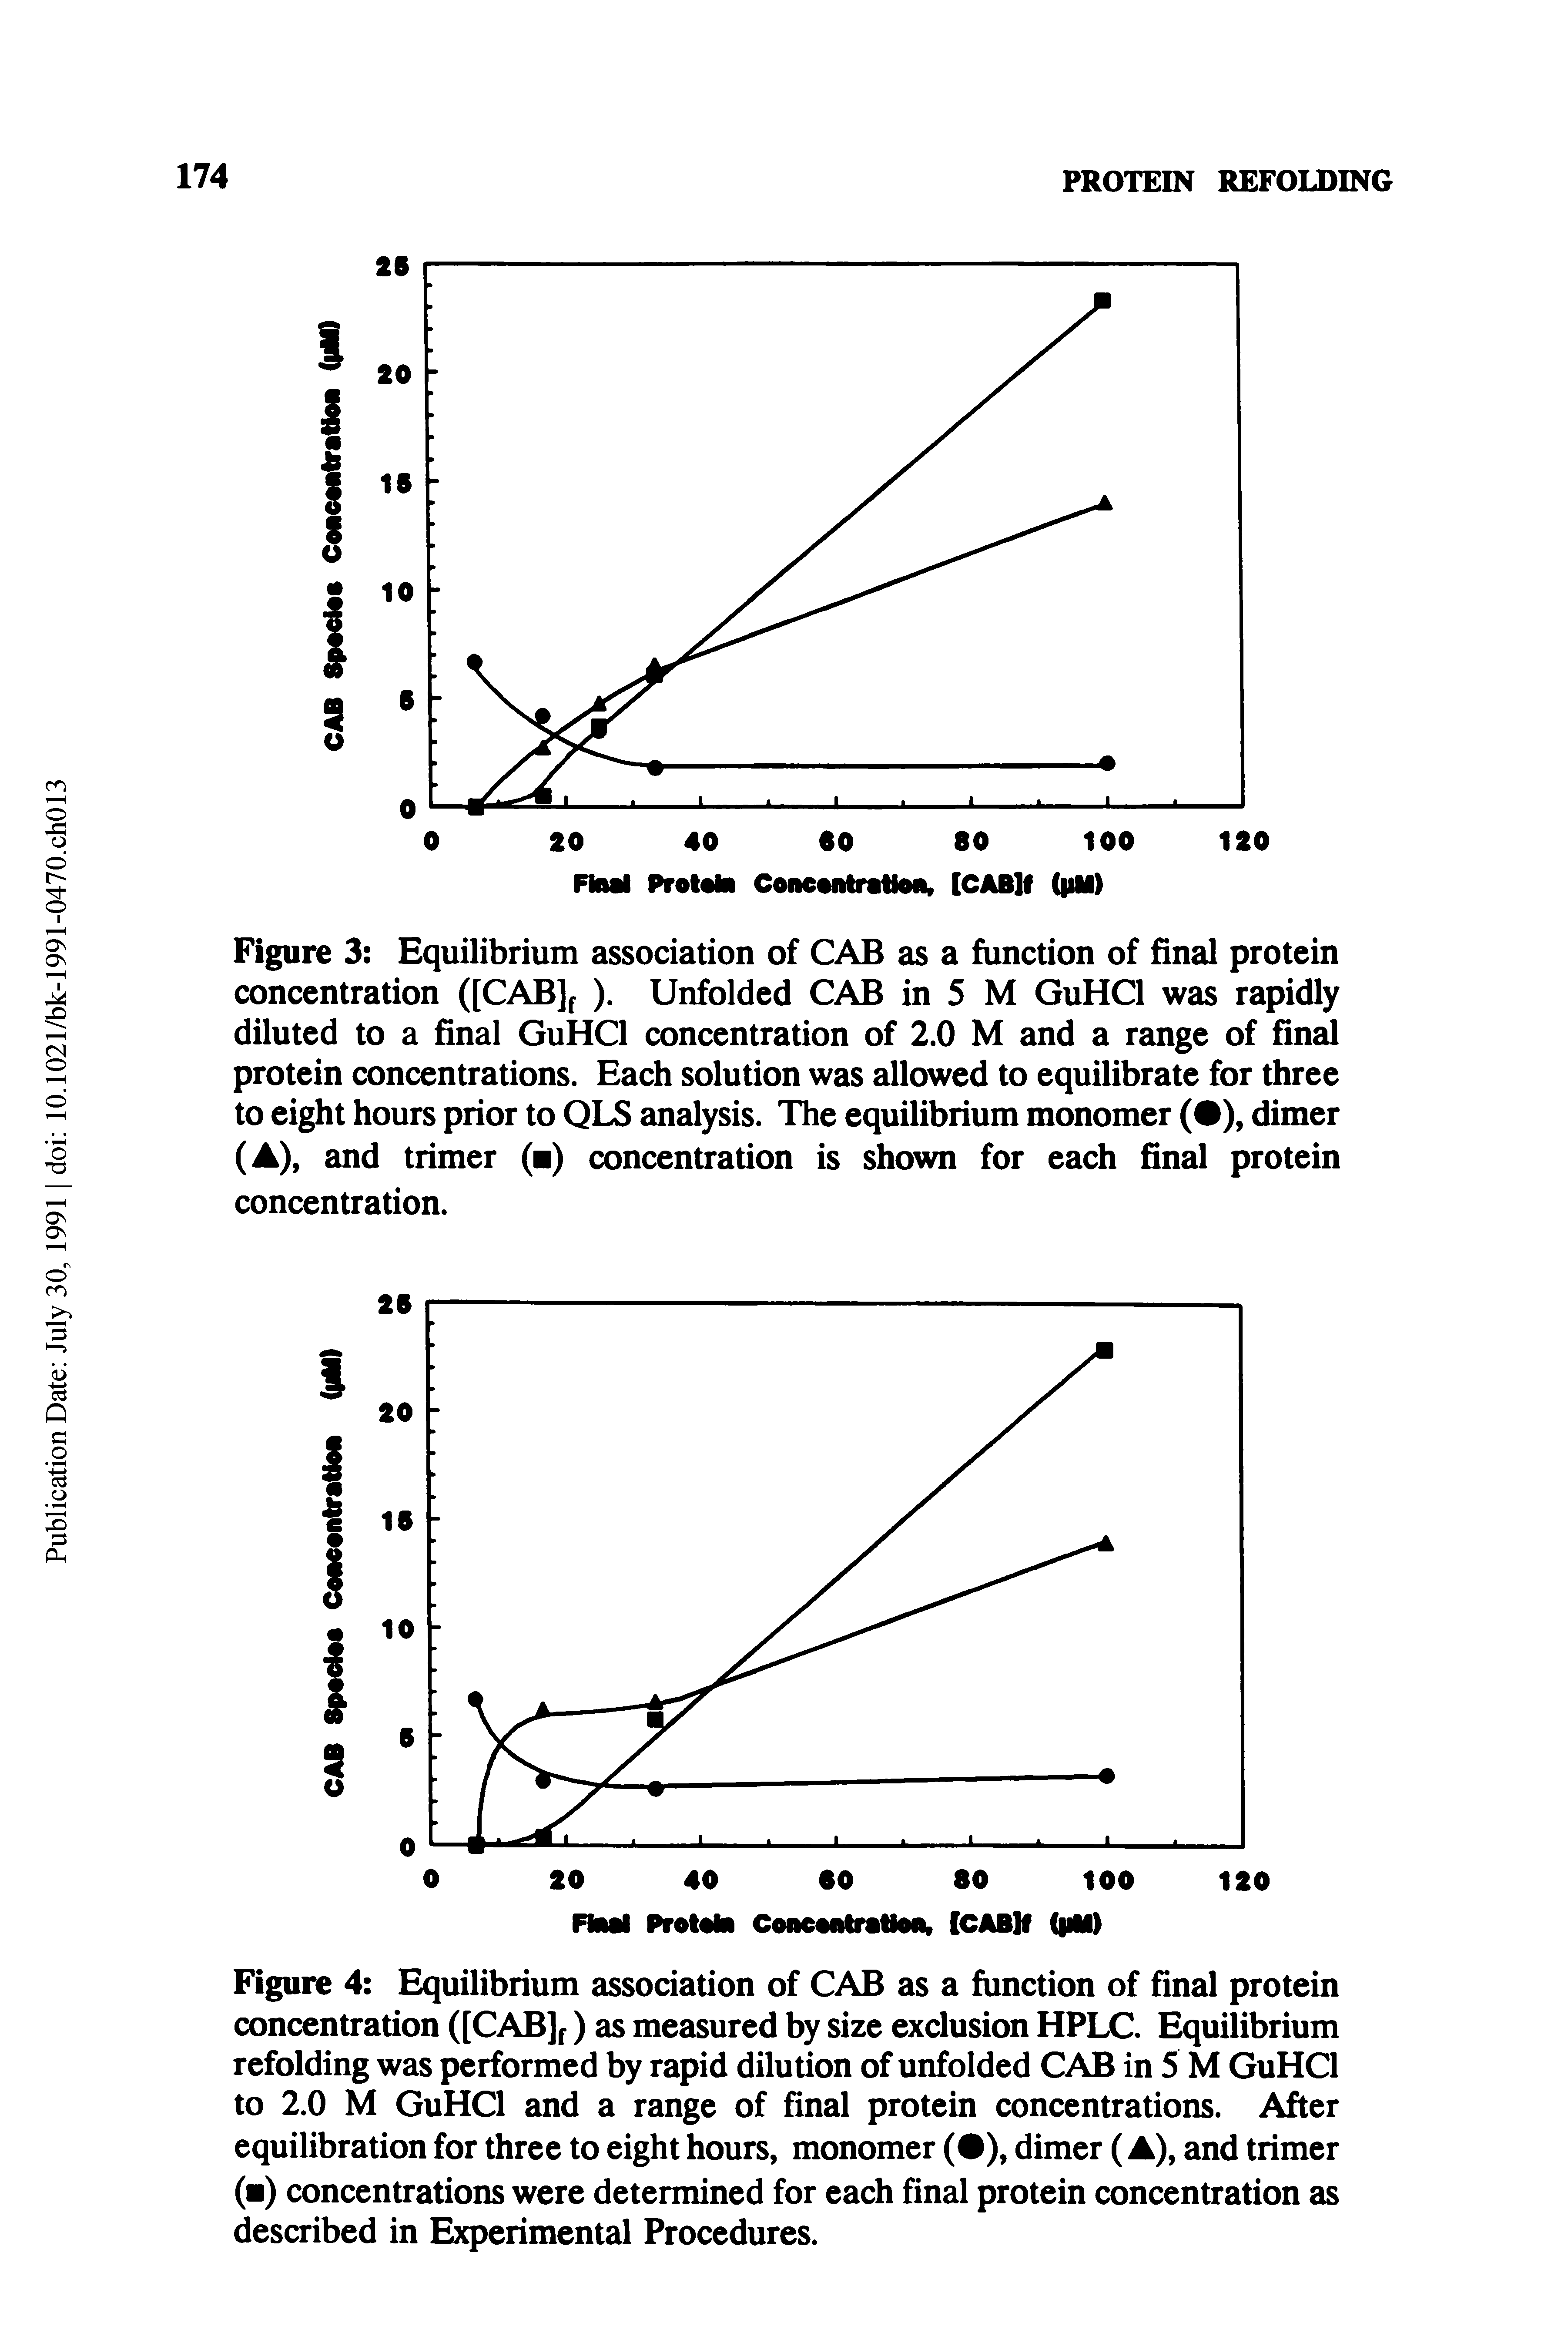 Figure 3 Equilibrium association of CAB as a function of final protein concentration ([CAB]f ). Unfolded CAB in 5 M GuHCl was rapidly diluted to a final GuHCl concentration of 2.0 M and a range of final protein concentrations. Each solution was allowed to equilibrate for three to eight hours prior to QLS analysis. The equilibrium monomer ( ), dimer ( ), and trimer ( ) concentration is shown for each final protein concentration.